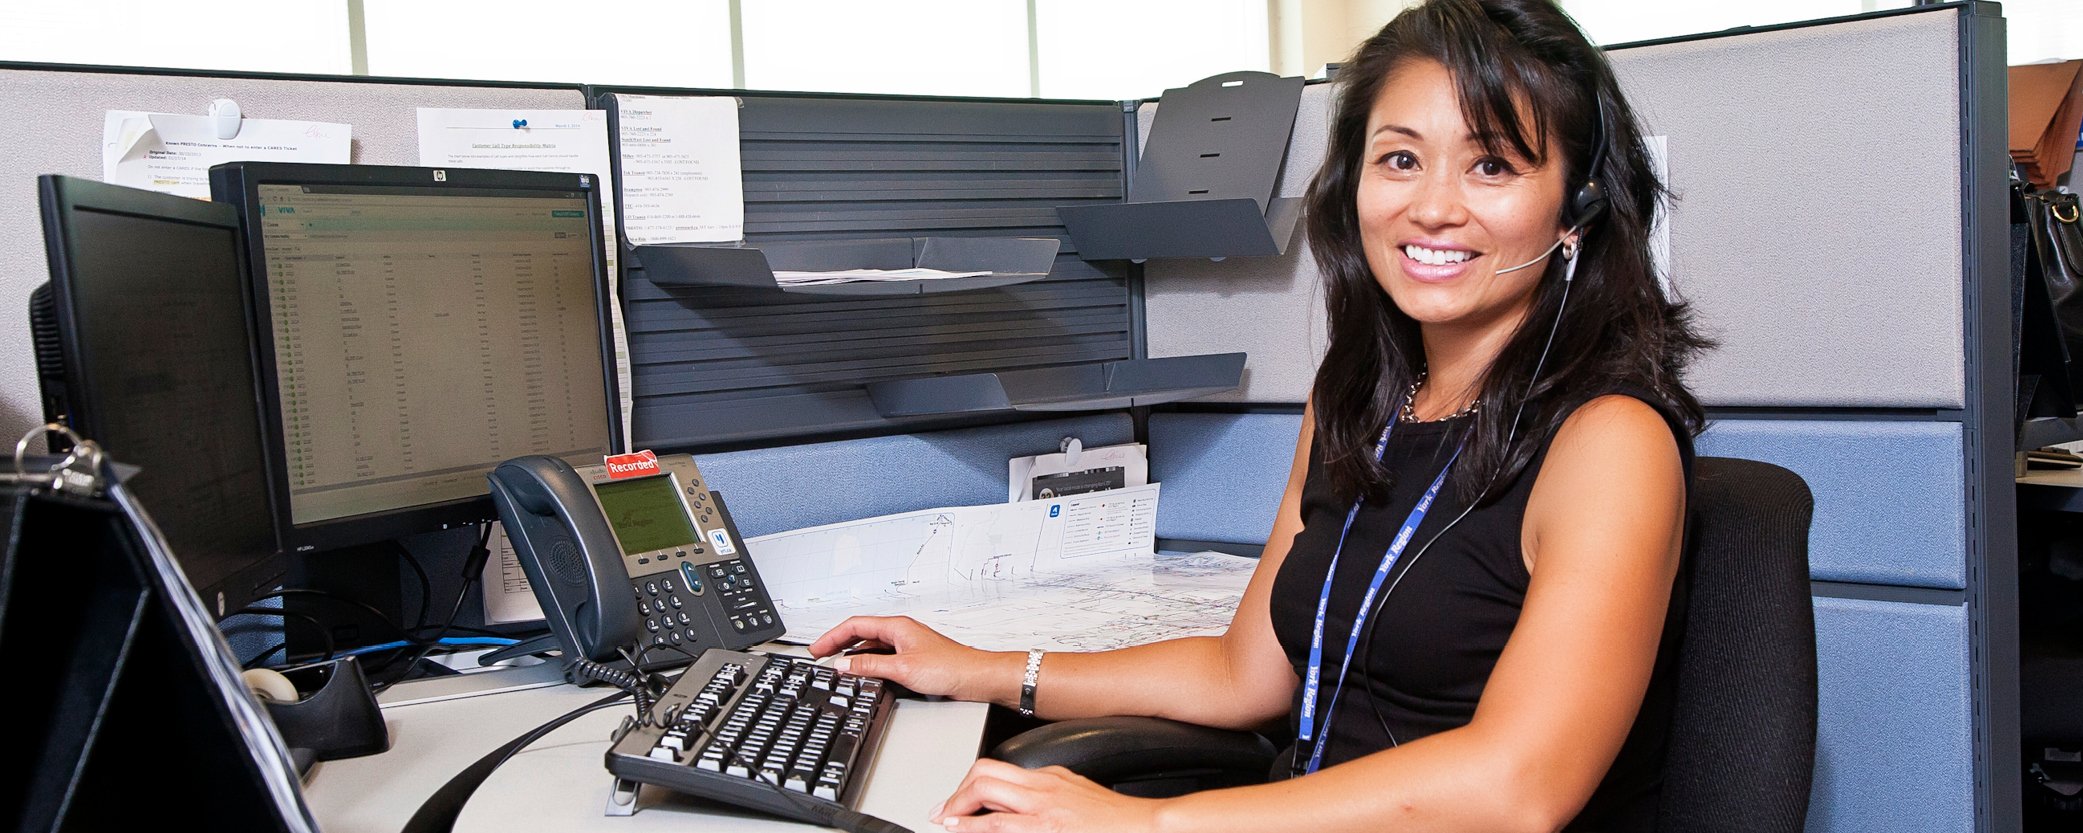 Photo of a Customer Service Rep posing in front of an office desk